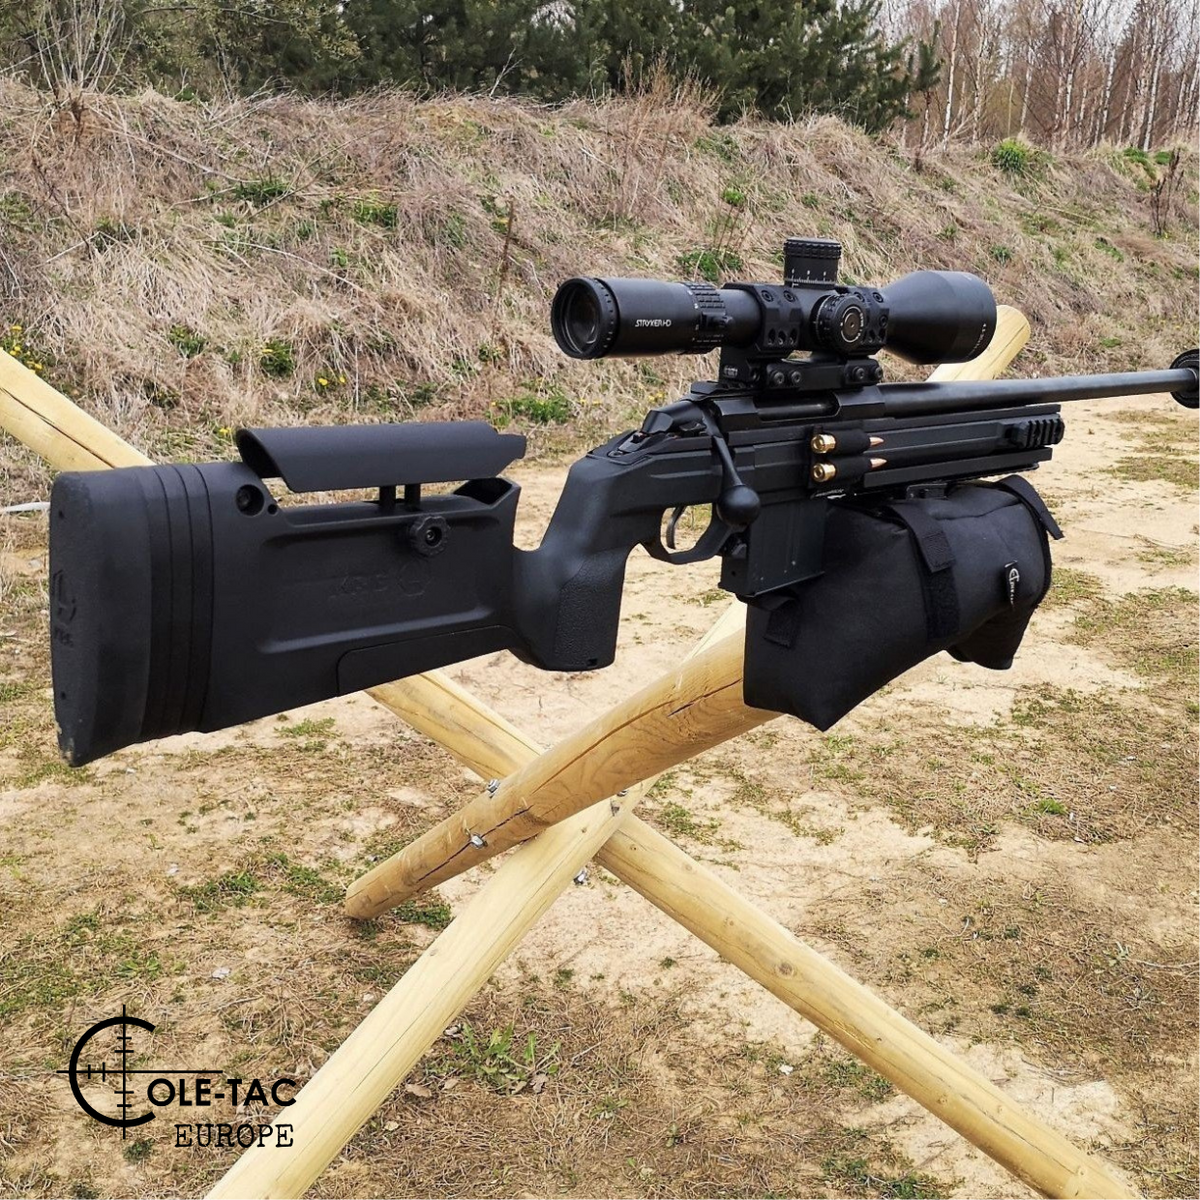 Home  Cole-TAC Europe - Buy High Quality Suppressor Covers Online